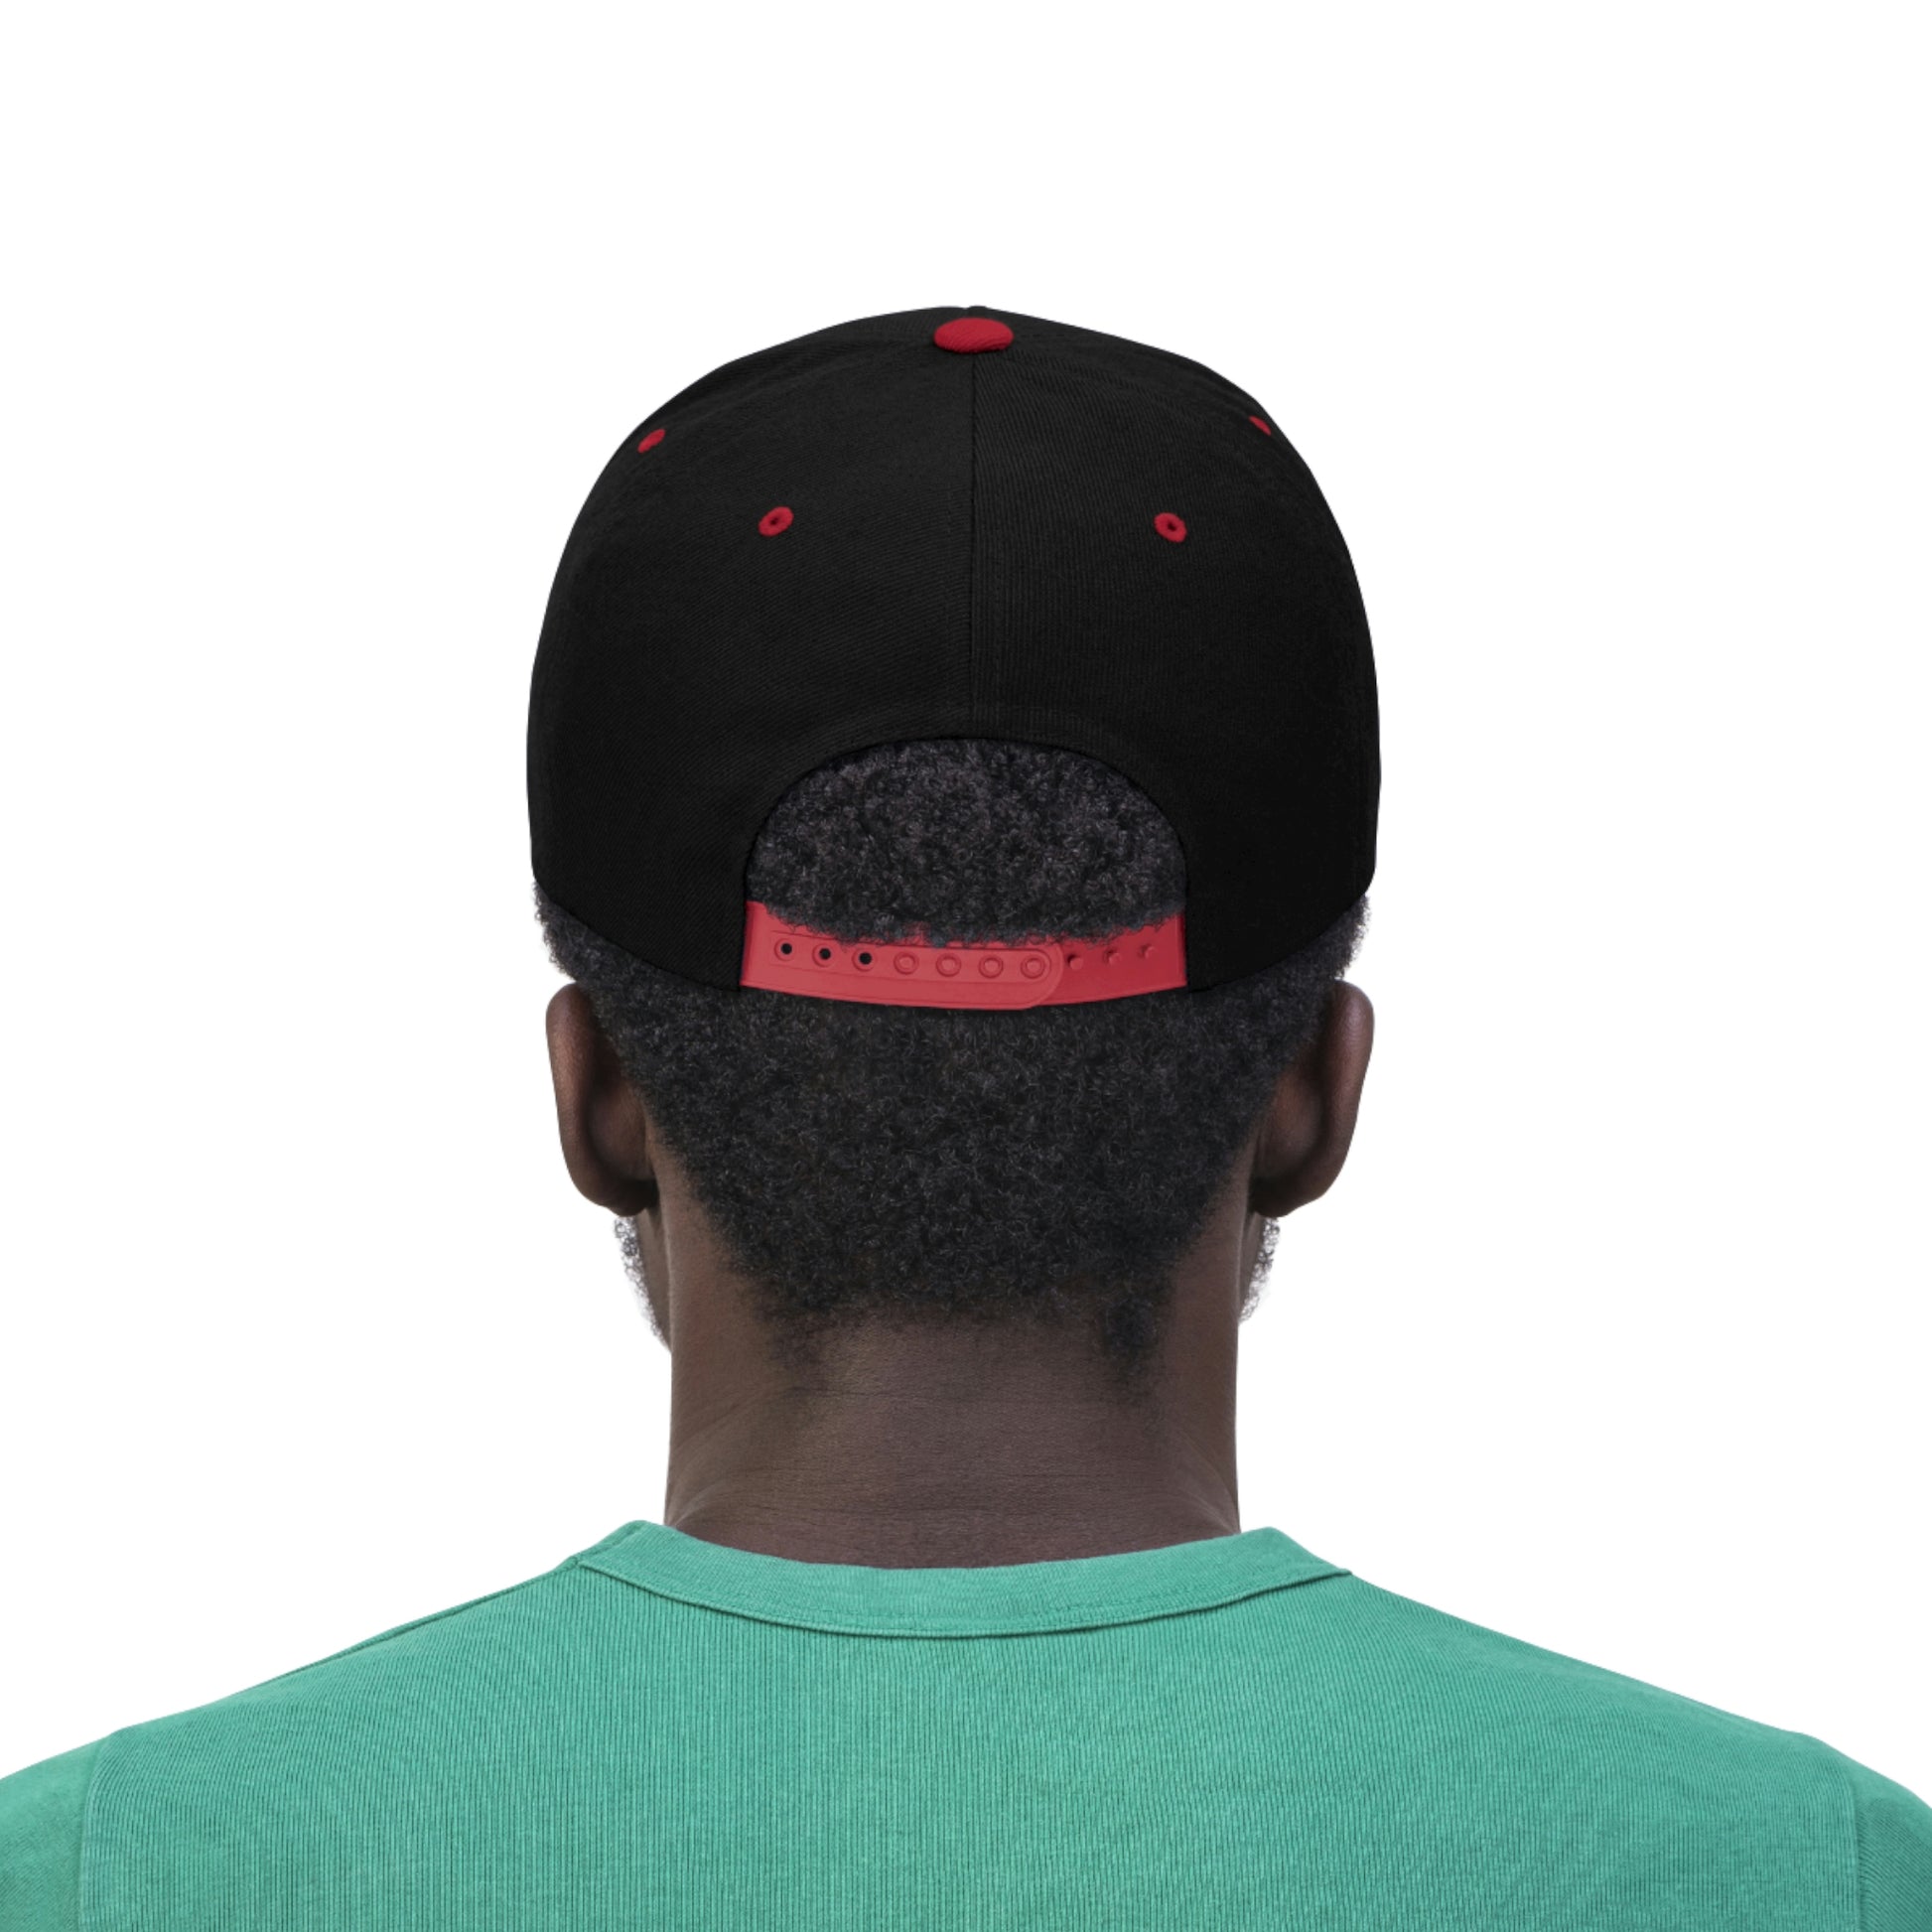 The back of the Warm Cannabis Paradise Snapback Hat in the red and black color scheme